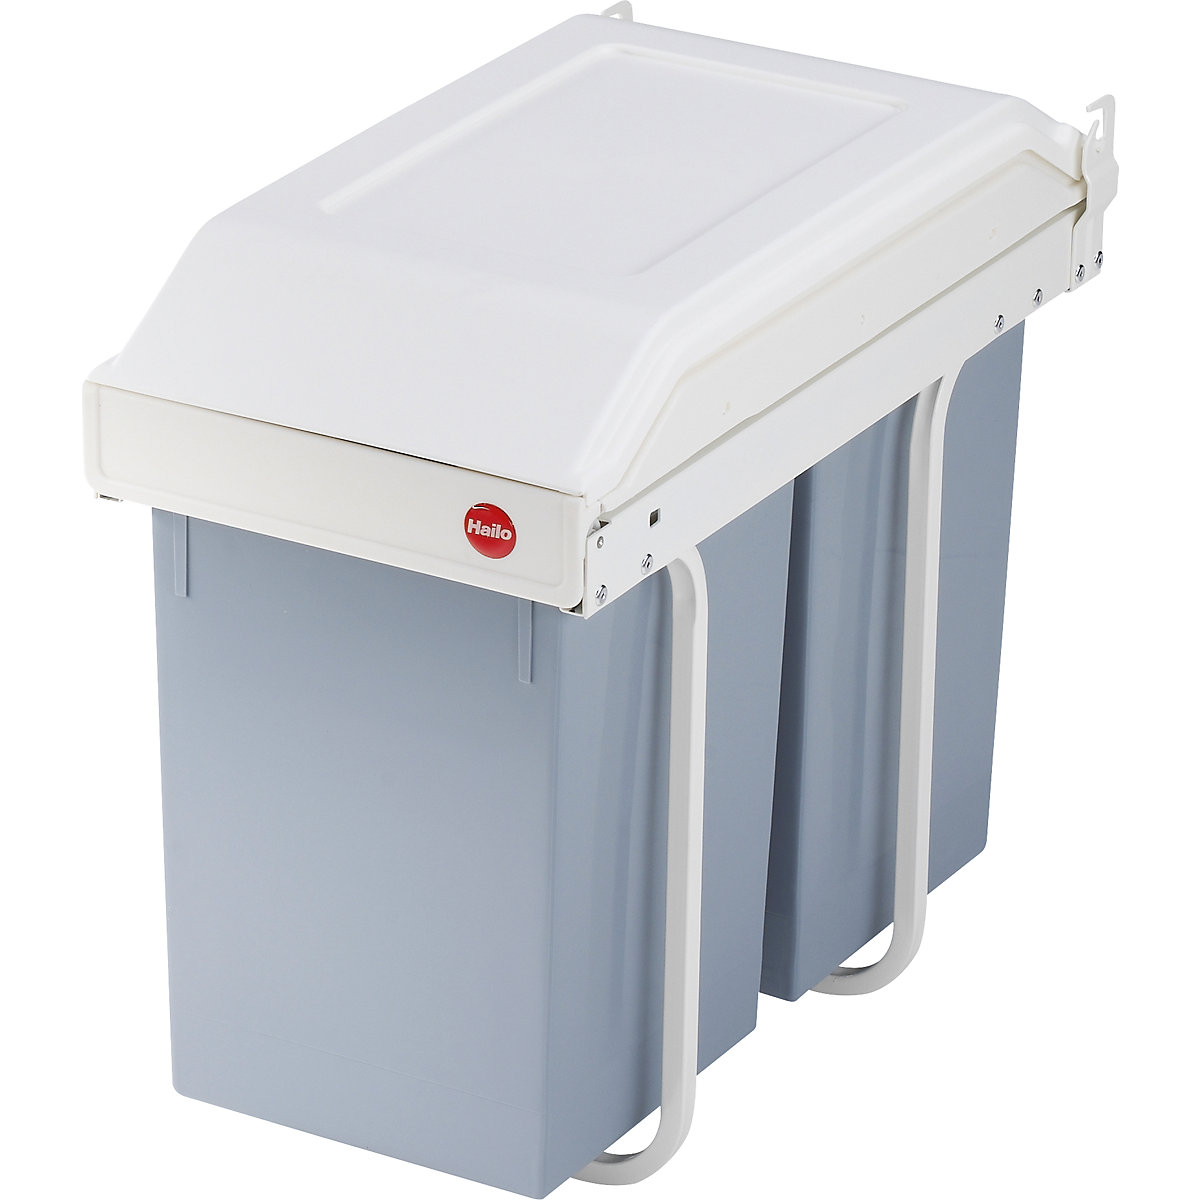 Multi-Box duo L built-in waste separation system - Hailo